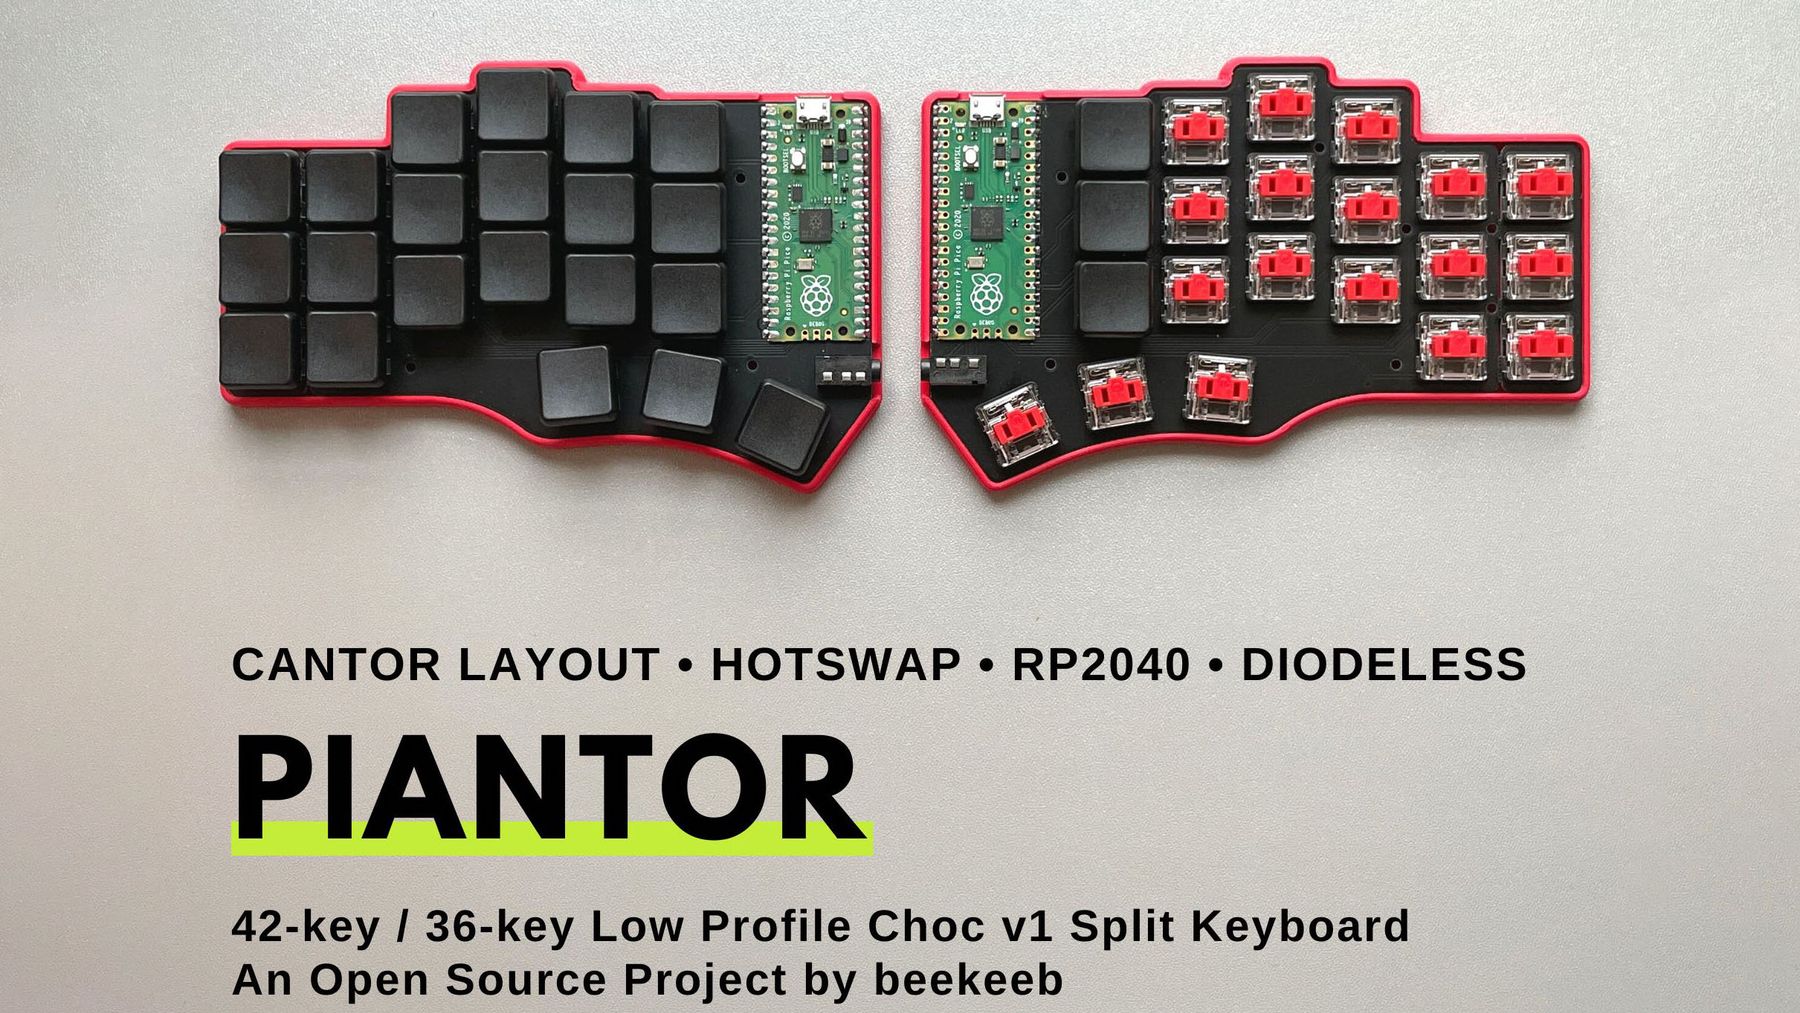 New keyboard with Cantor layout that has 42/36 hotswappable keys using RP2040 MCU